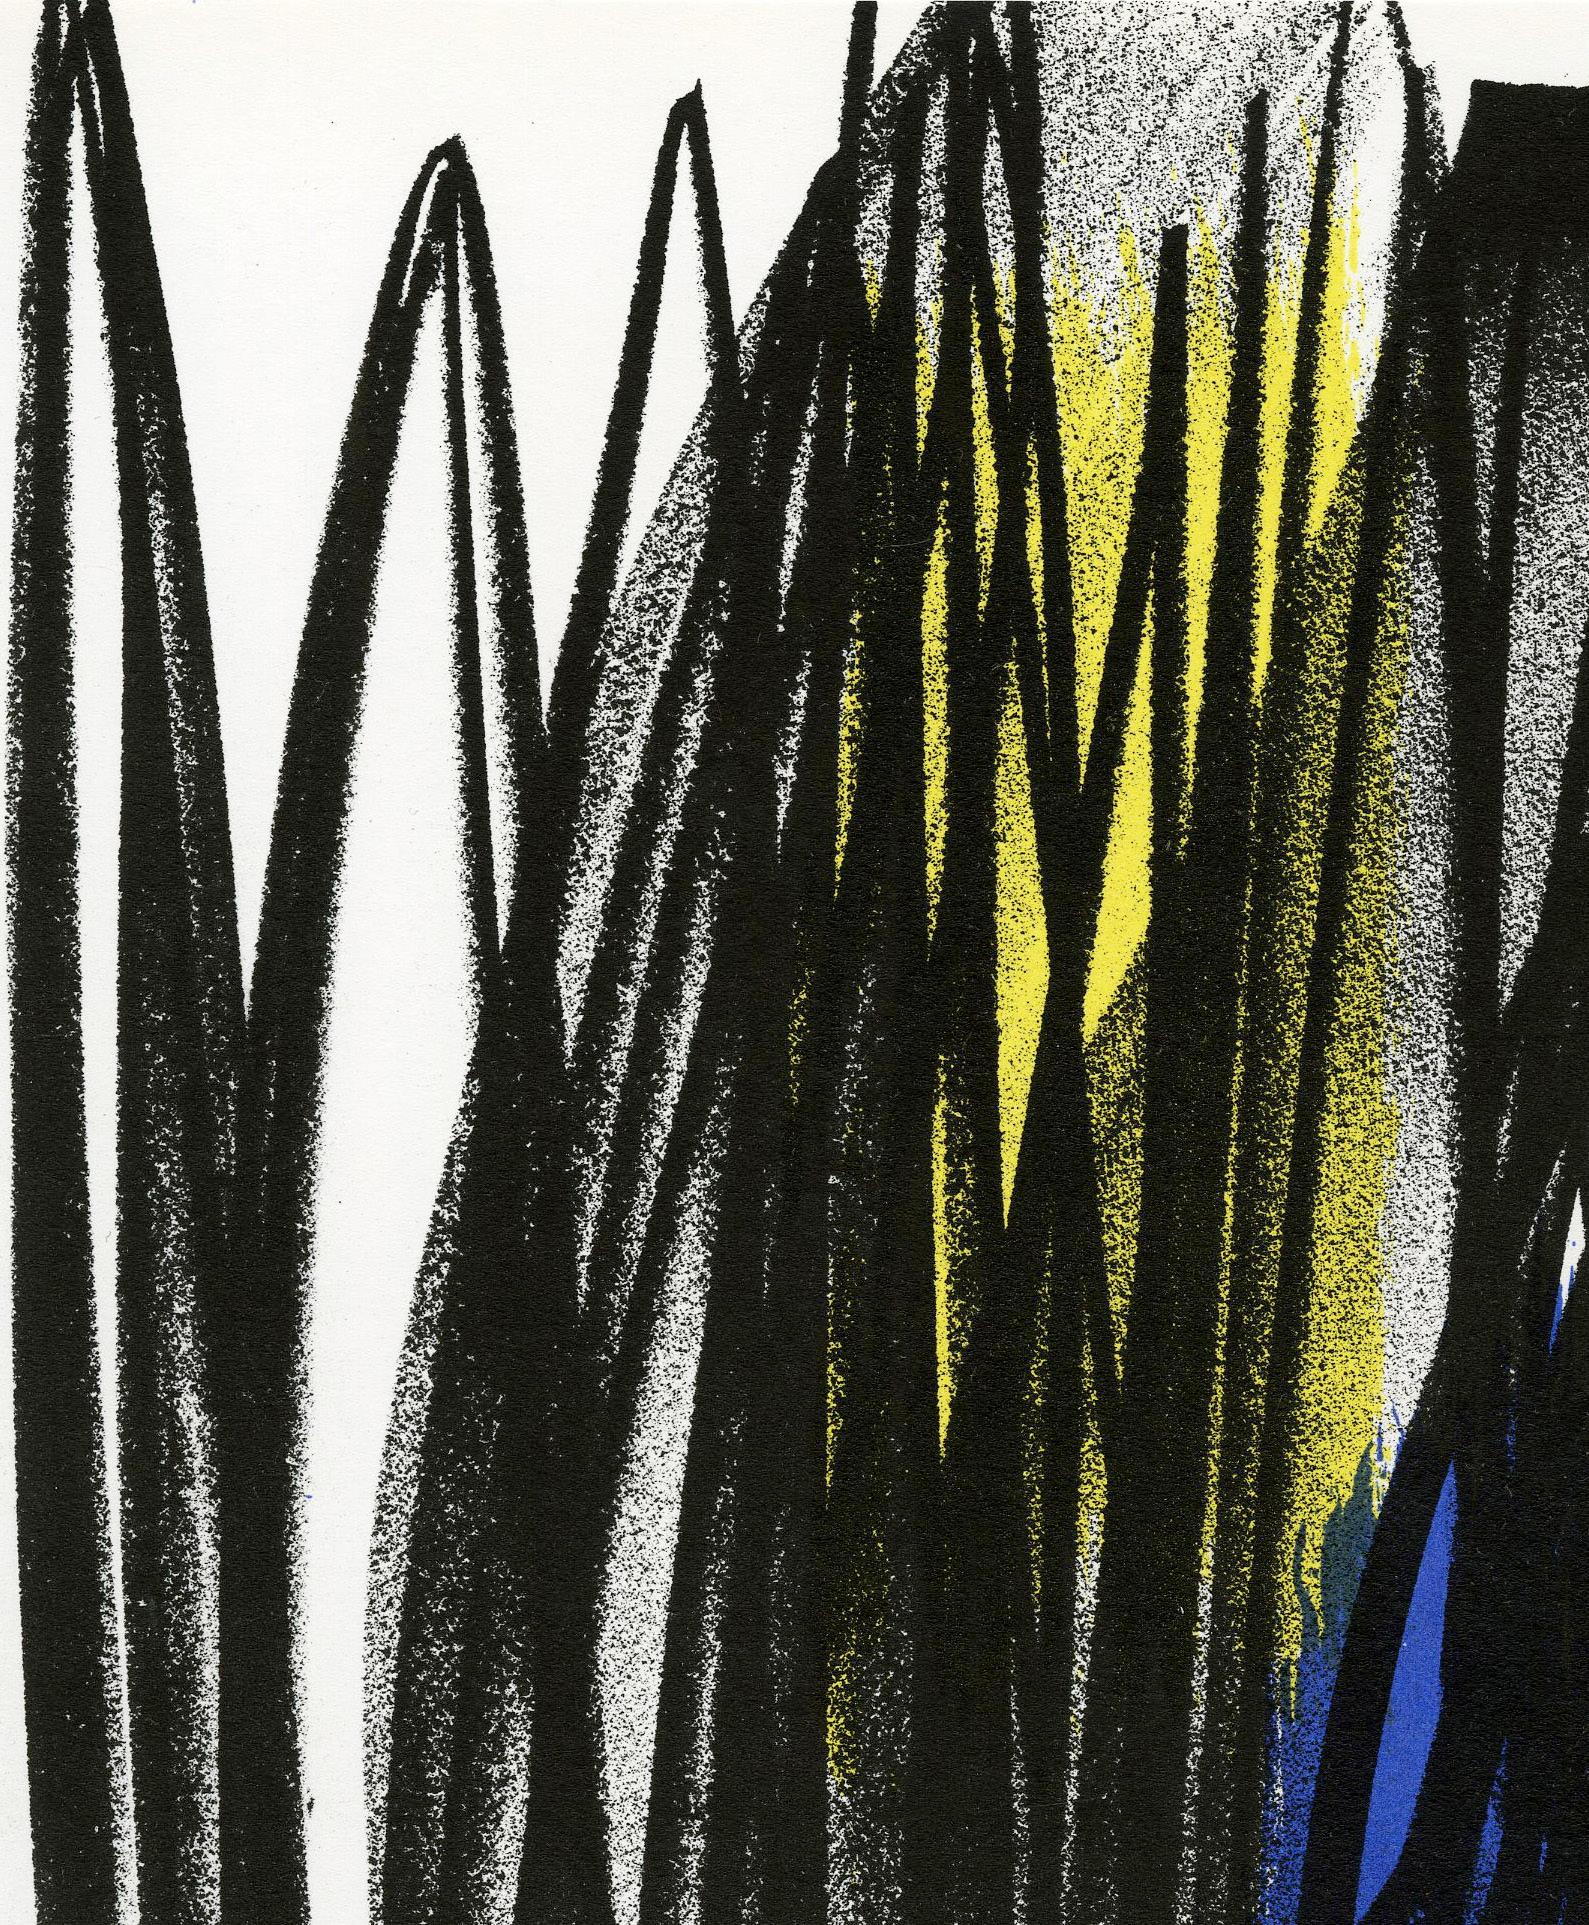 Untitled (for the journal, XX Siécle) - Print by Hans Hartung